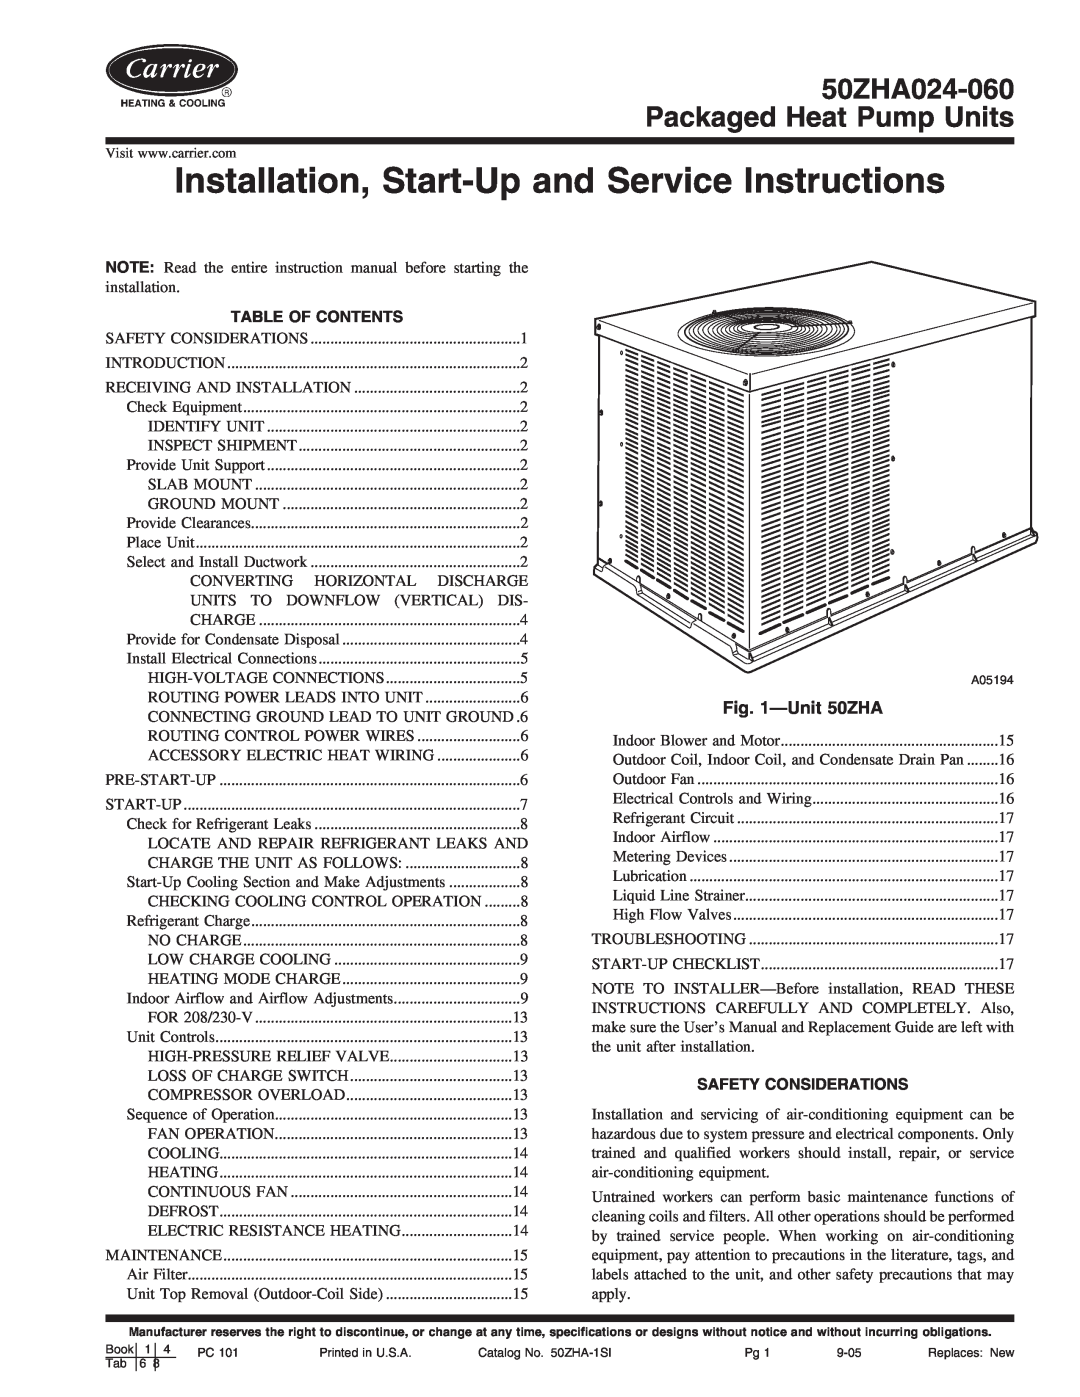 Carrier 50ZHA024-060 instruction manual Unit50ZHA, Table Of Contents, Safety Considerations 